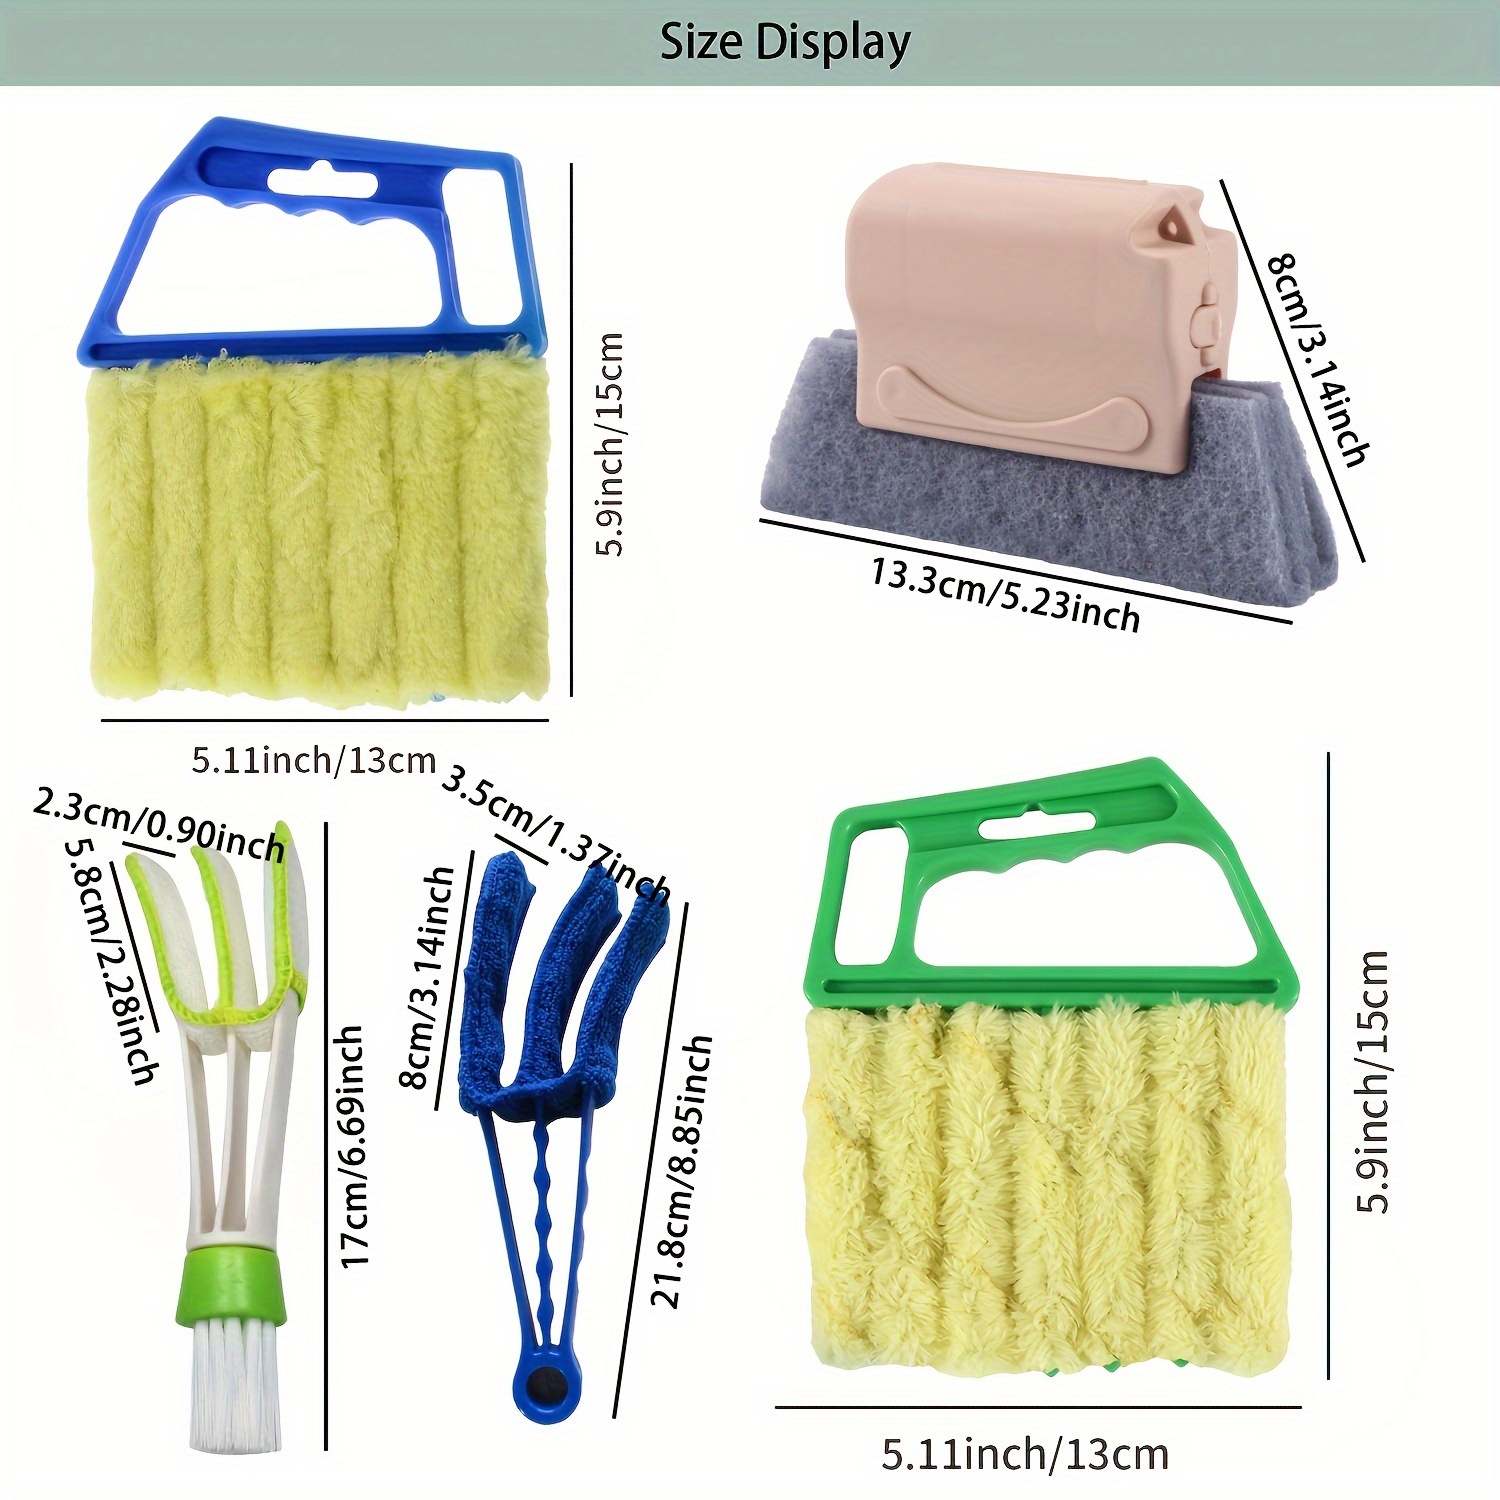 Jewelry Cleaning Solution Lot Ceramic Stove Top Wipes Brush Sweeping Detachable Cleaning Brush Blinds Blinds Brush Vents Cleaning Cleaning Brush